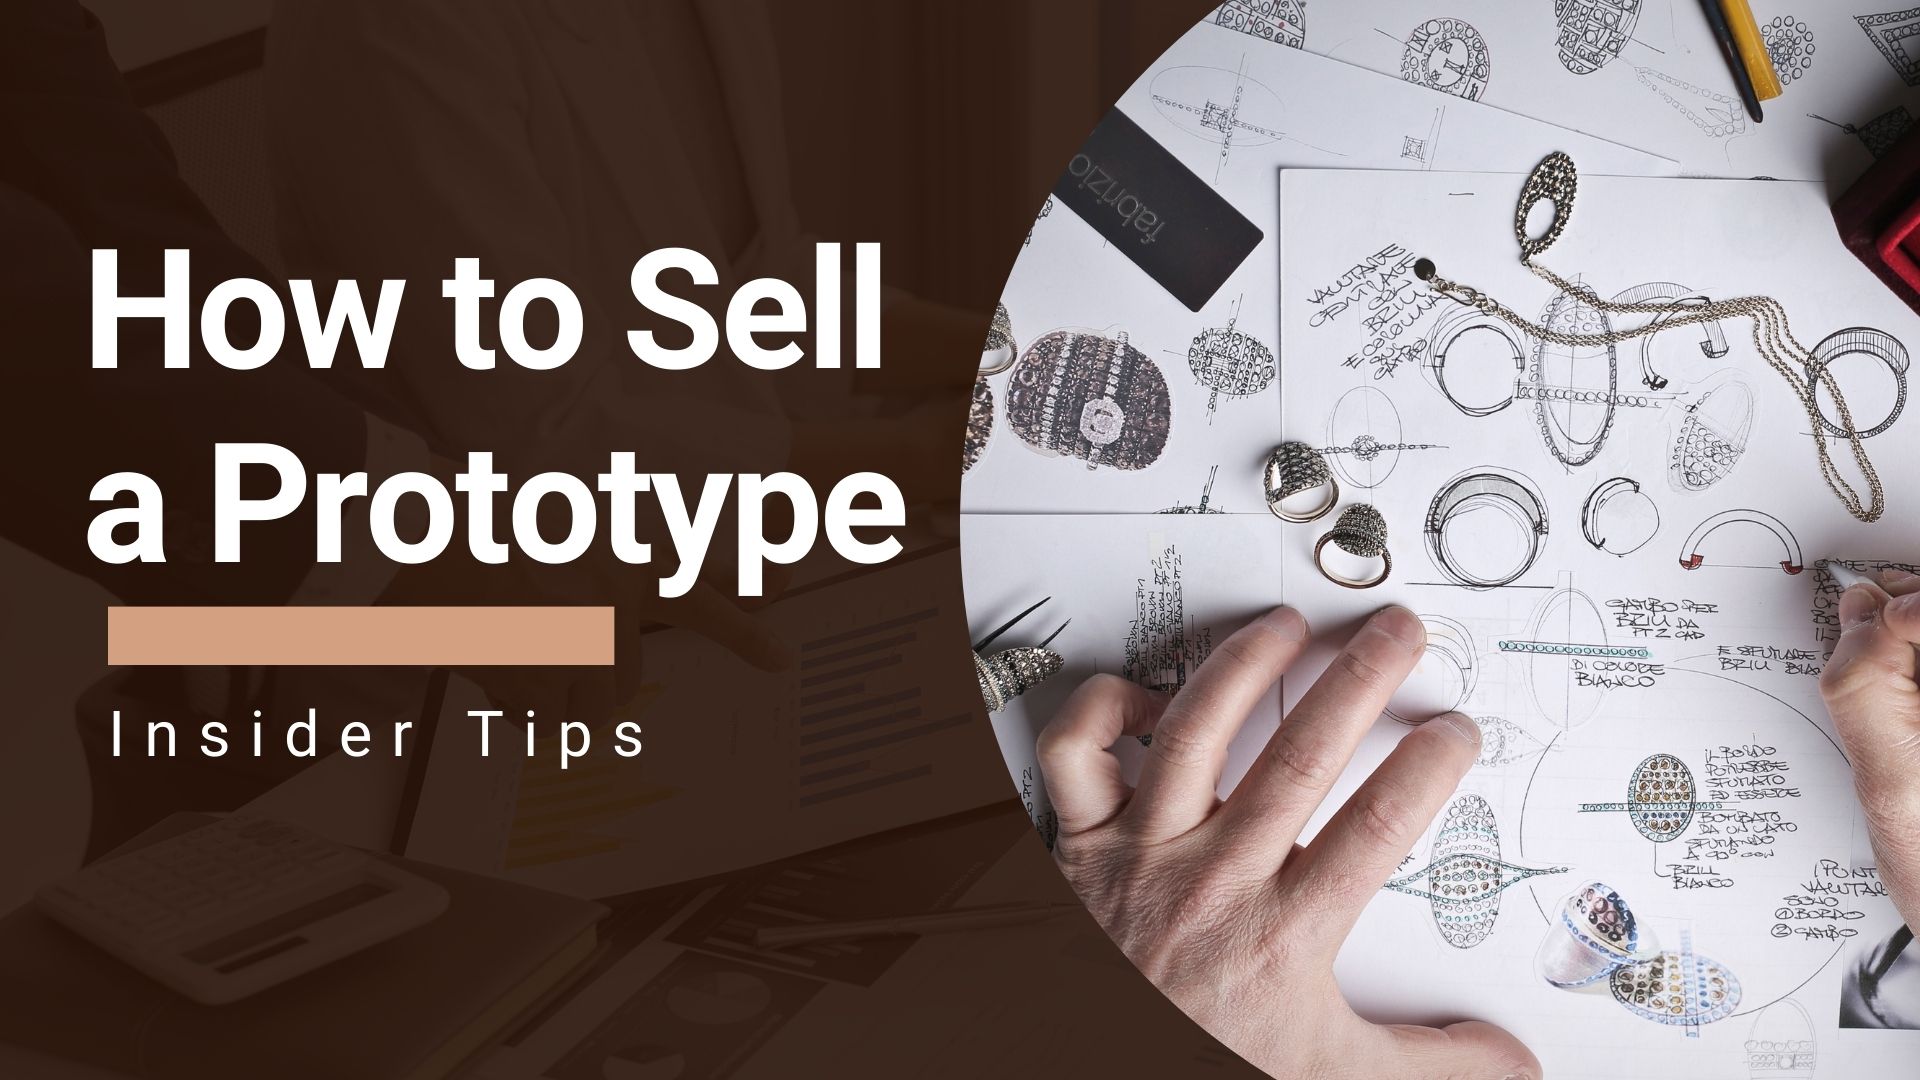 How to Sell a Prototype